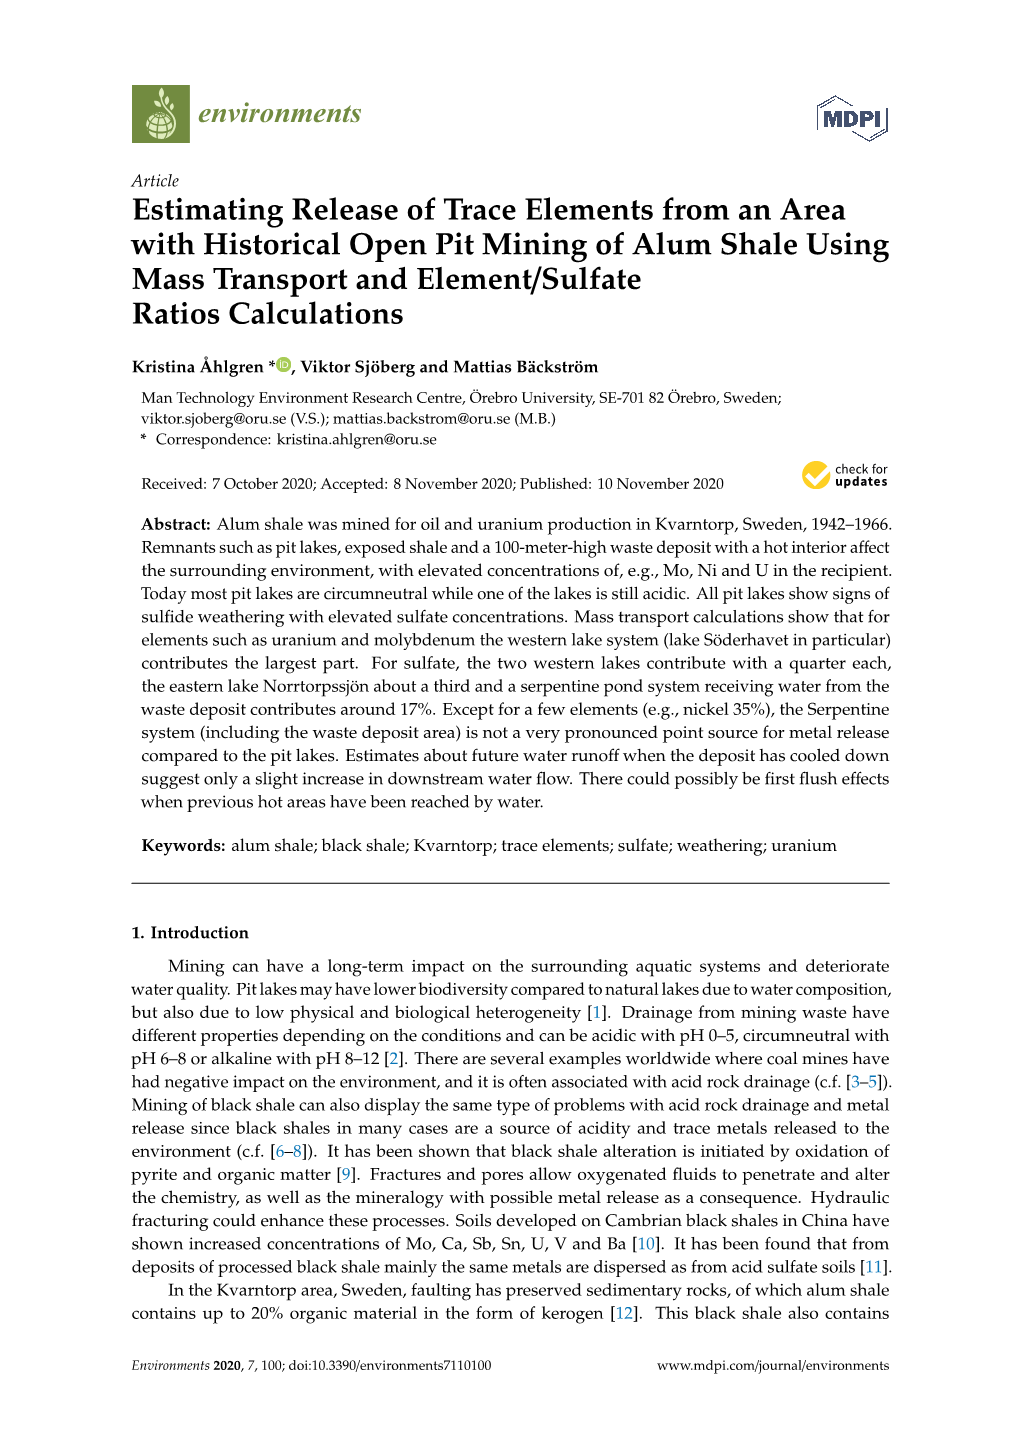 Estimating Release of Trace Elements from an Area with Historical Open Pit Mining of Alum Shale Using Mass Transport and Element/Sulfate Ratios Calculations